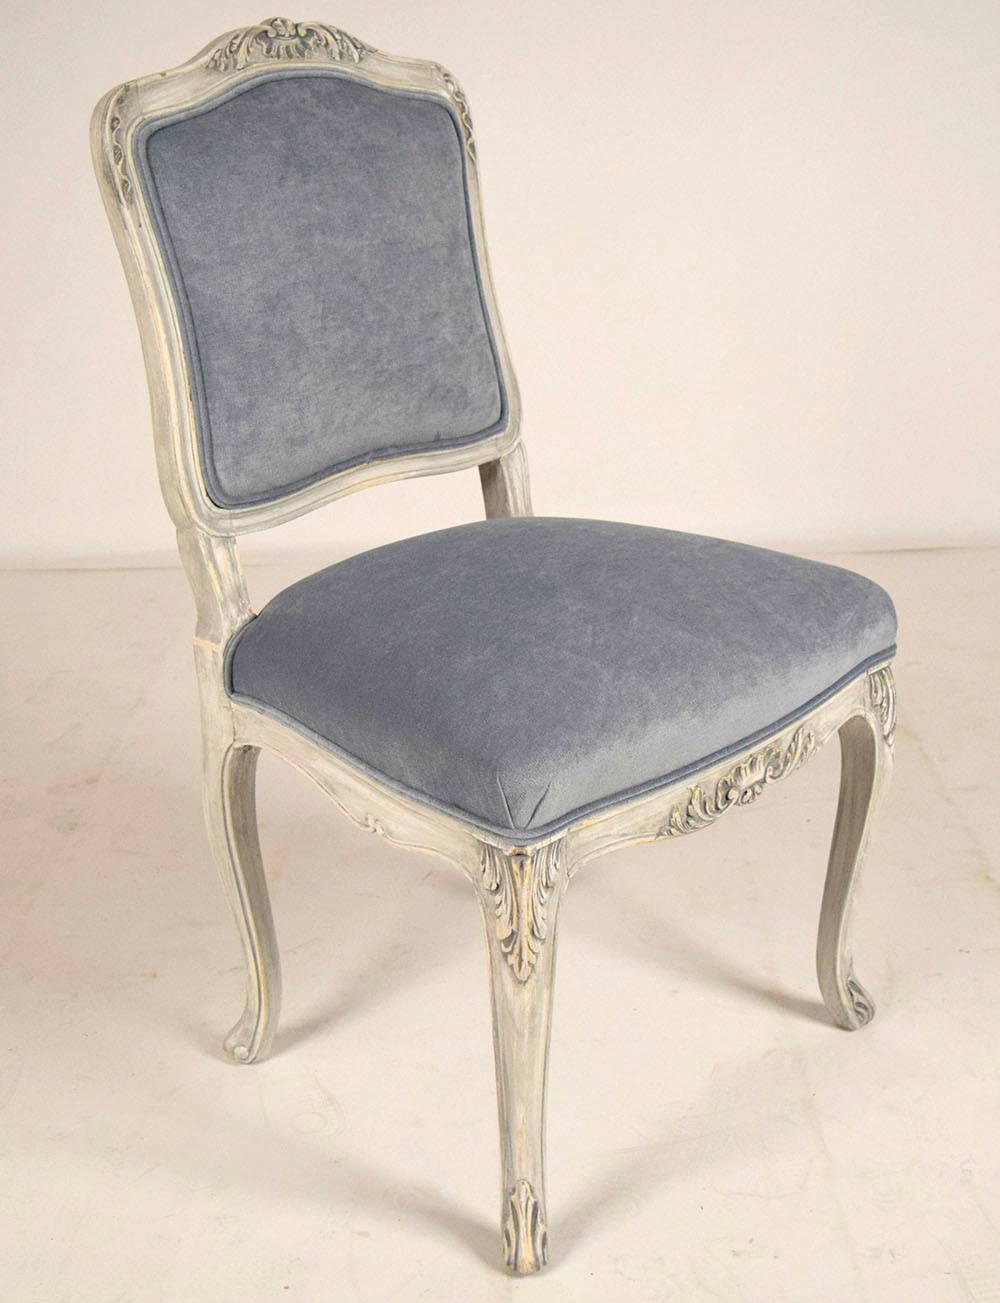 Set of eight French dining chairs. Solid walnut frames with carvings all throughout the top, sides, front, bottom and legs. They have been painted in a gray and oyster color combination with a beautiful distressed finish. All chairs have been